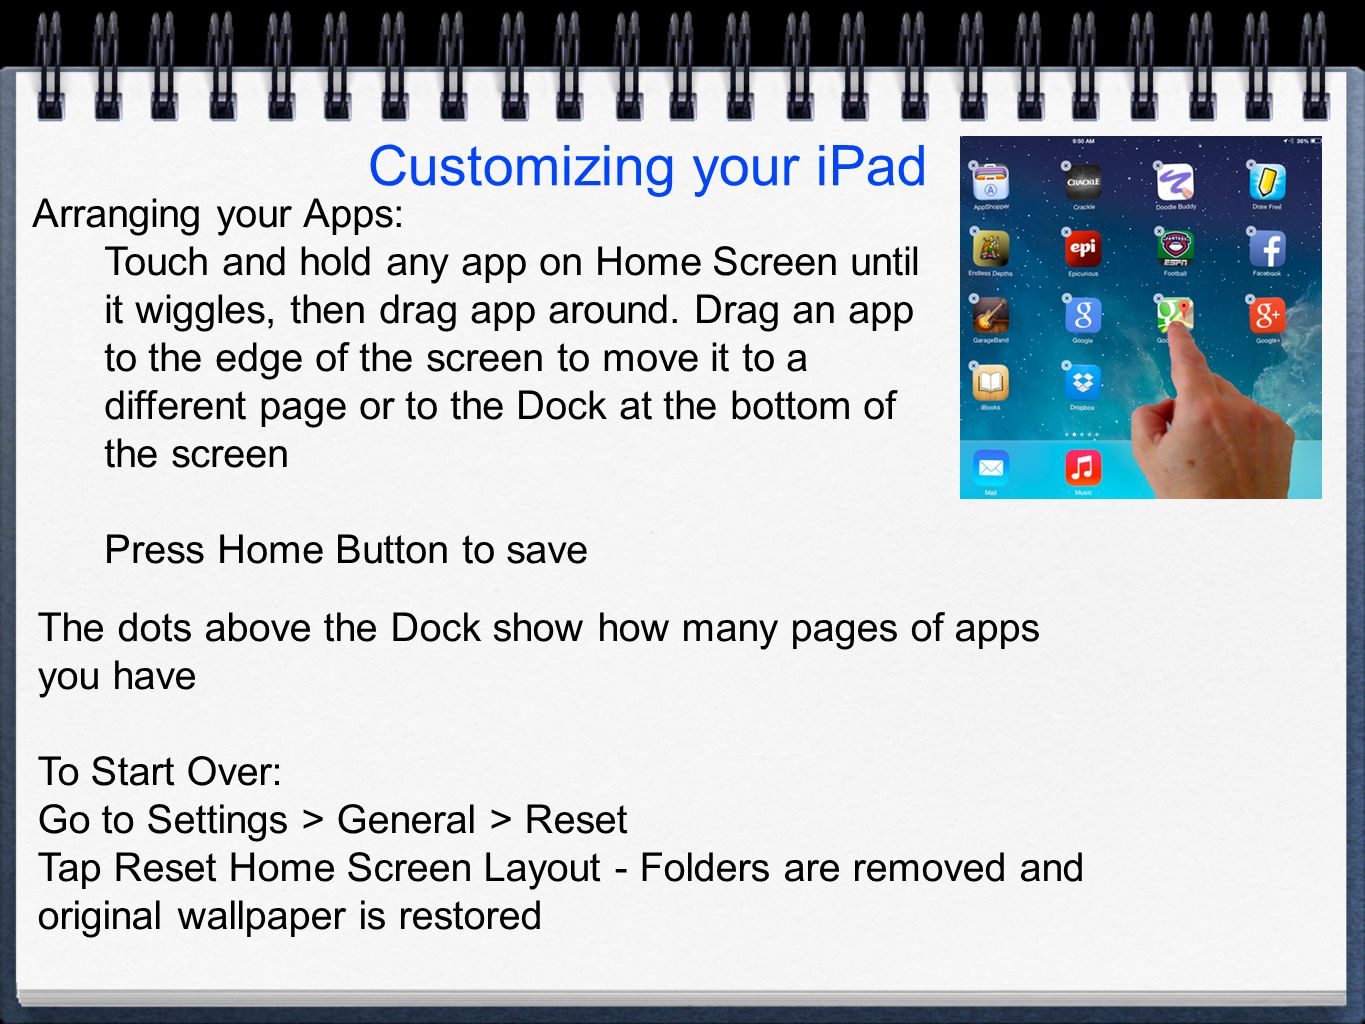 Customizing your iPad Arranging your Apps: Touch and hold any app on Home Screen until it wiggles, then drag app around.